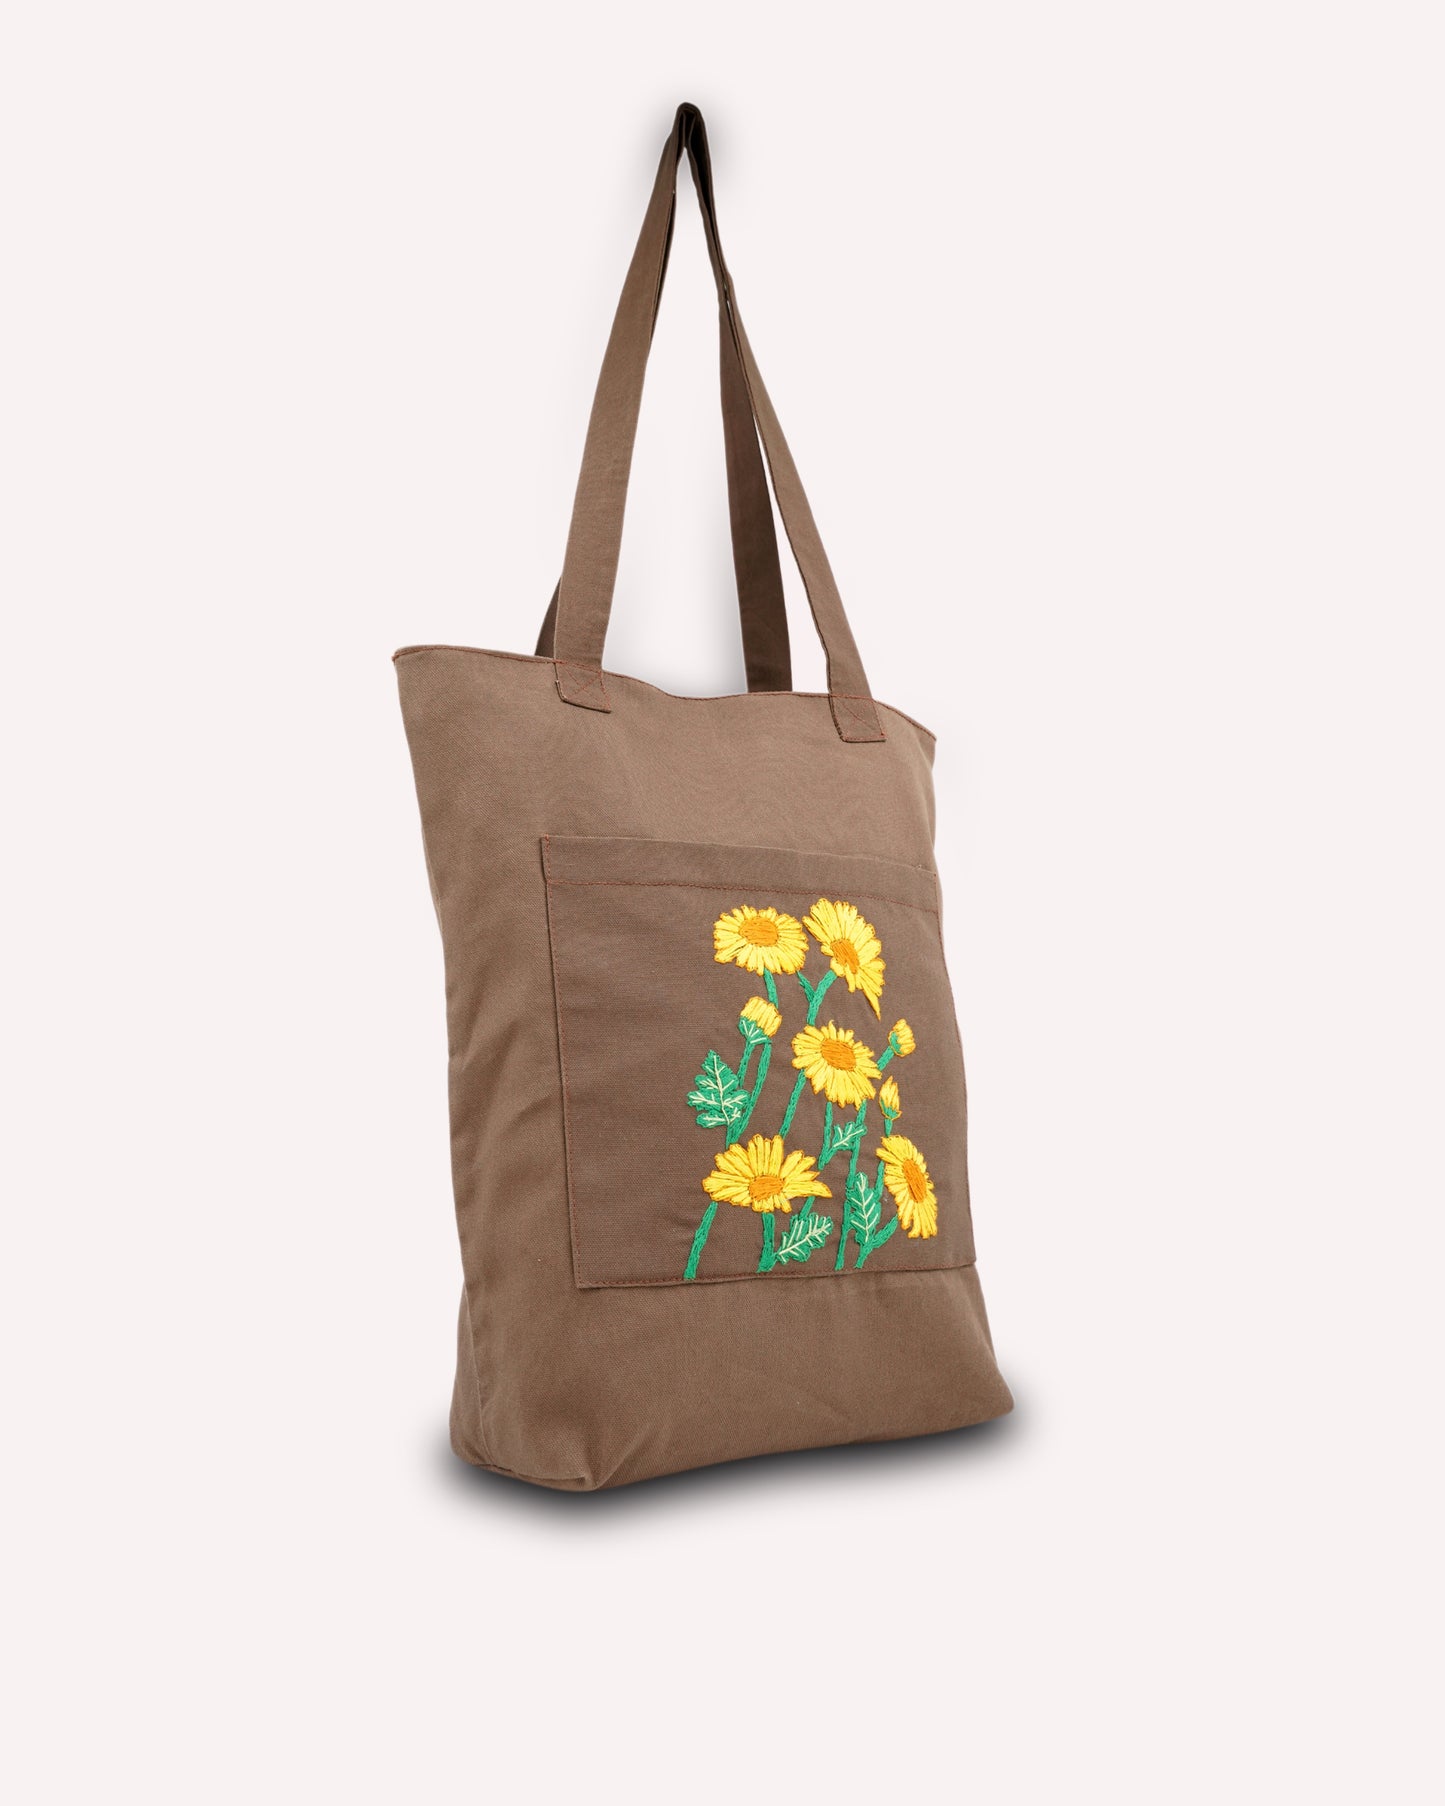 Cross Country Artisanal Carryall Tote Brown